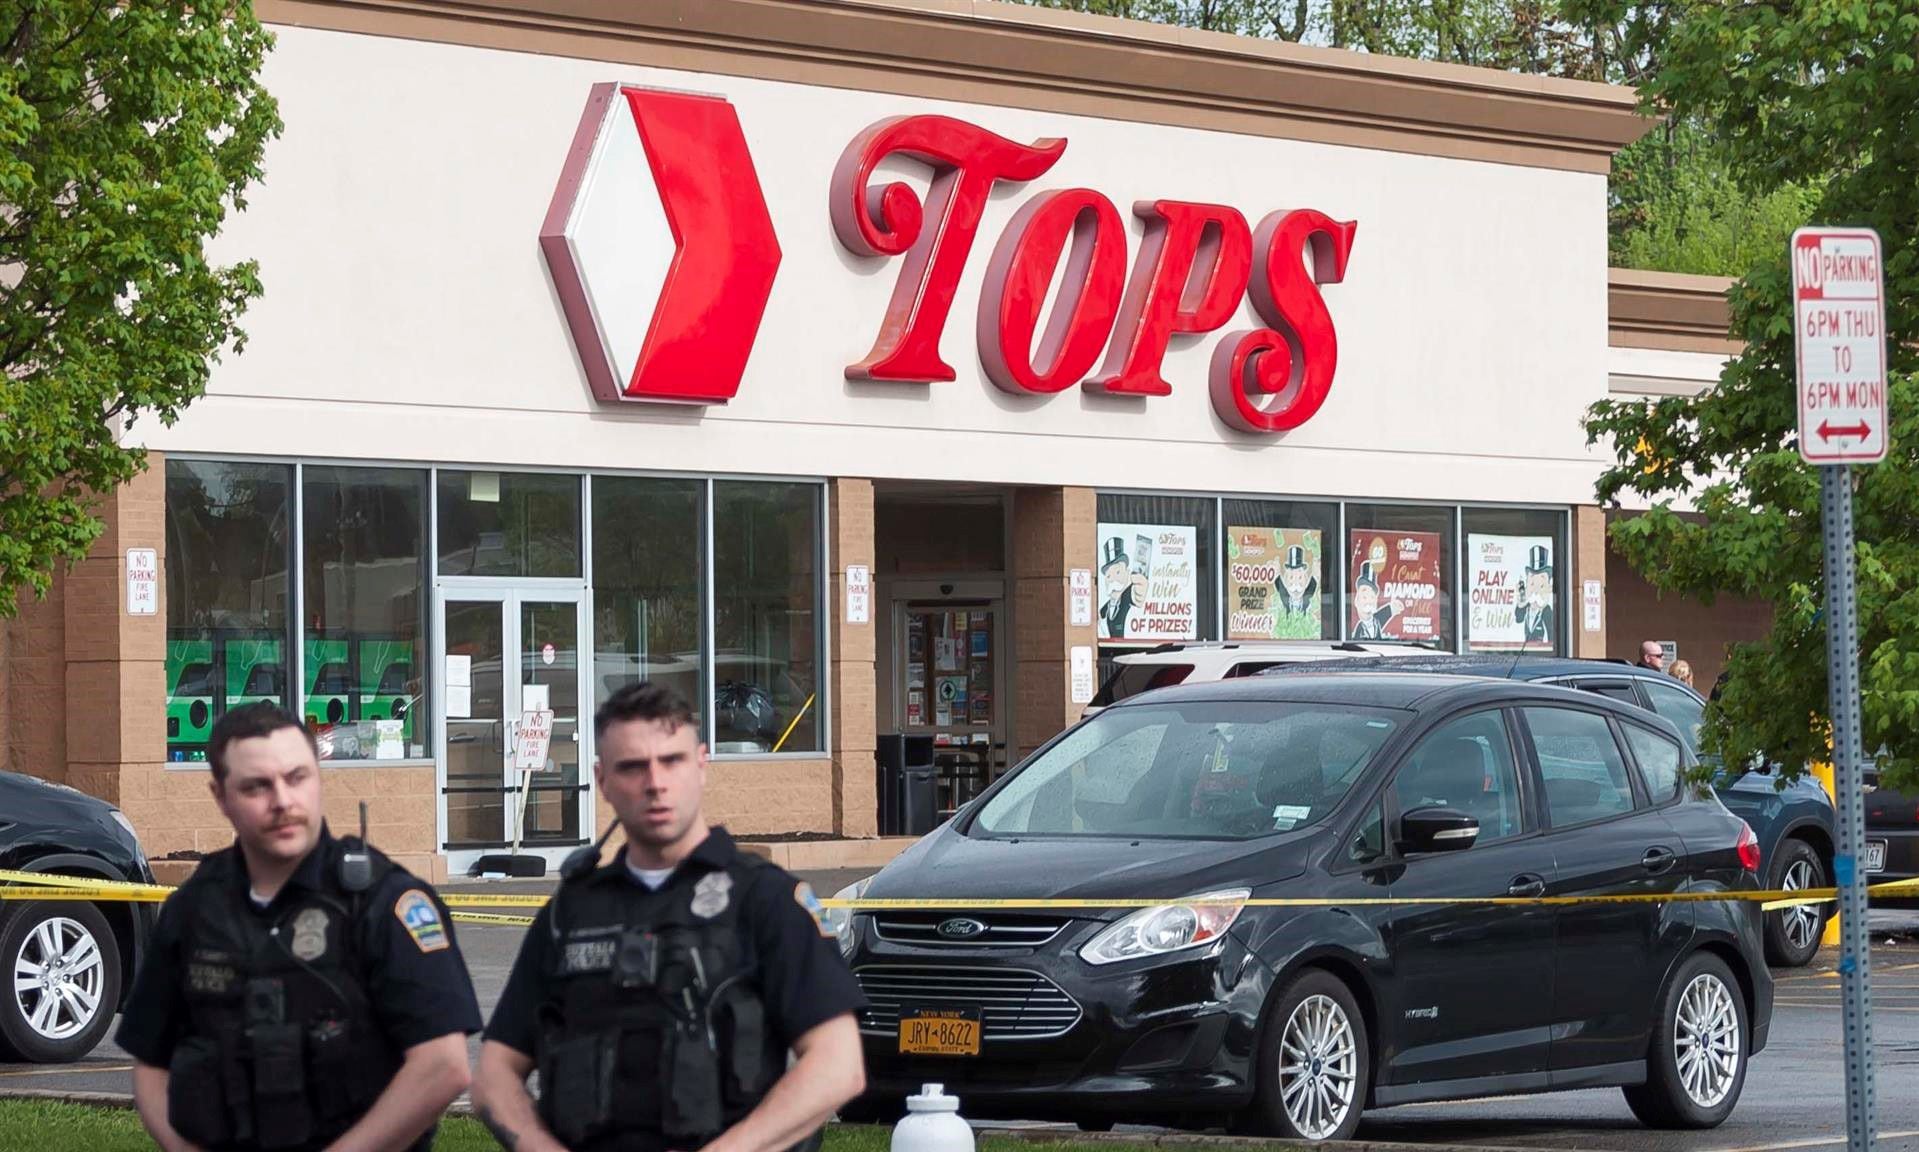 Police officers at the scene of a mass shooting at the Tops Friendly Market grocery store in Buffalo, New York, USA.  (EFE/EPA/BRANDON WATSON).